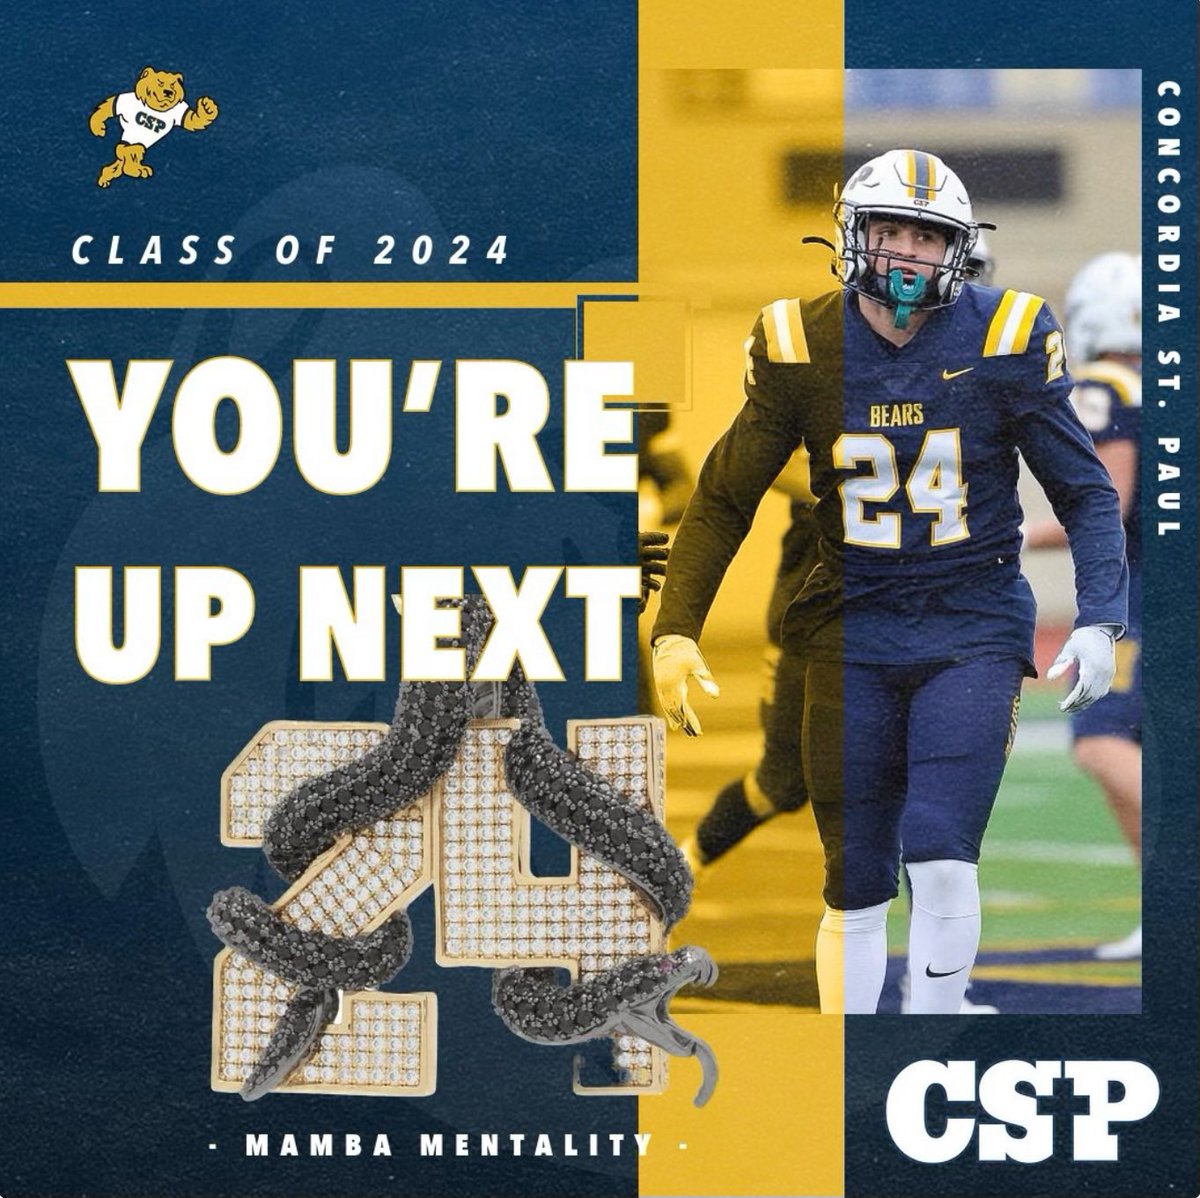 Honored to have received an offer from Concordia St. Paul! @Concordia_OLine @EDGYTIM @PrepRedzoneIL